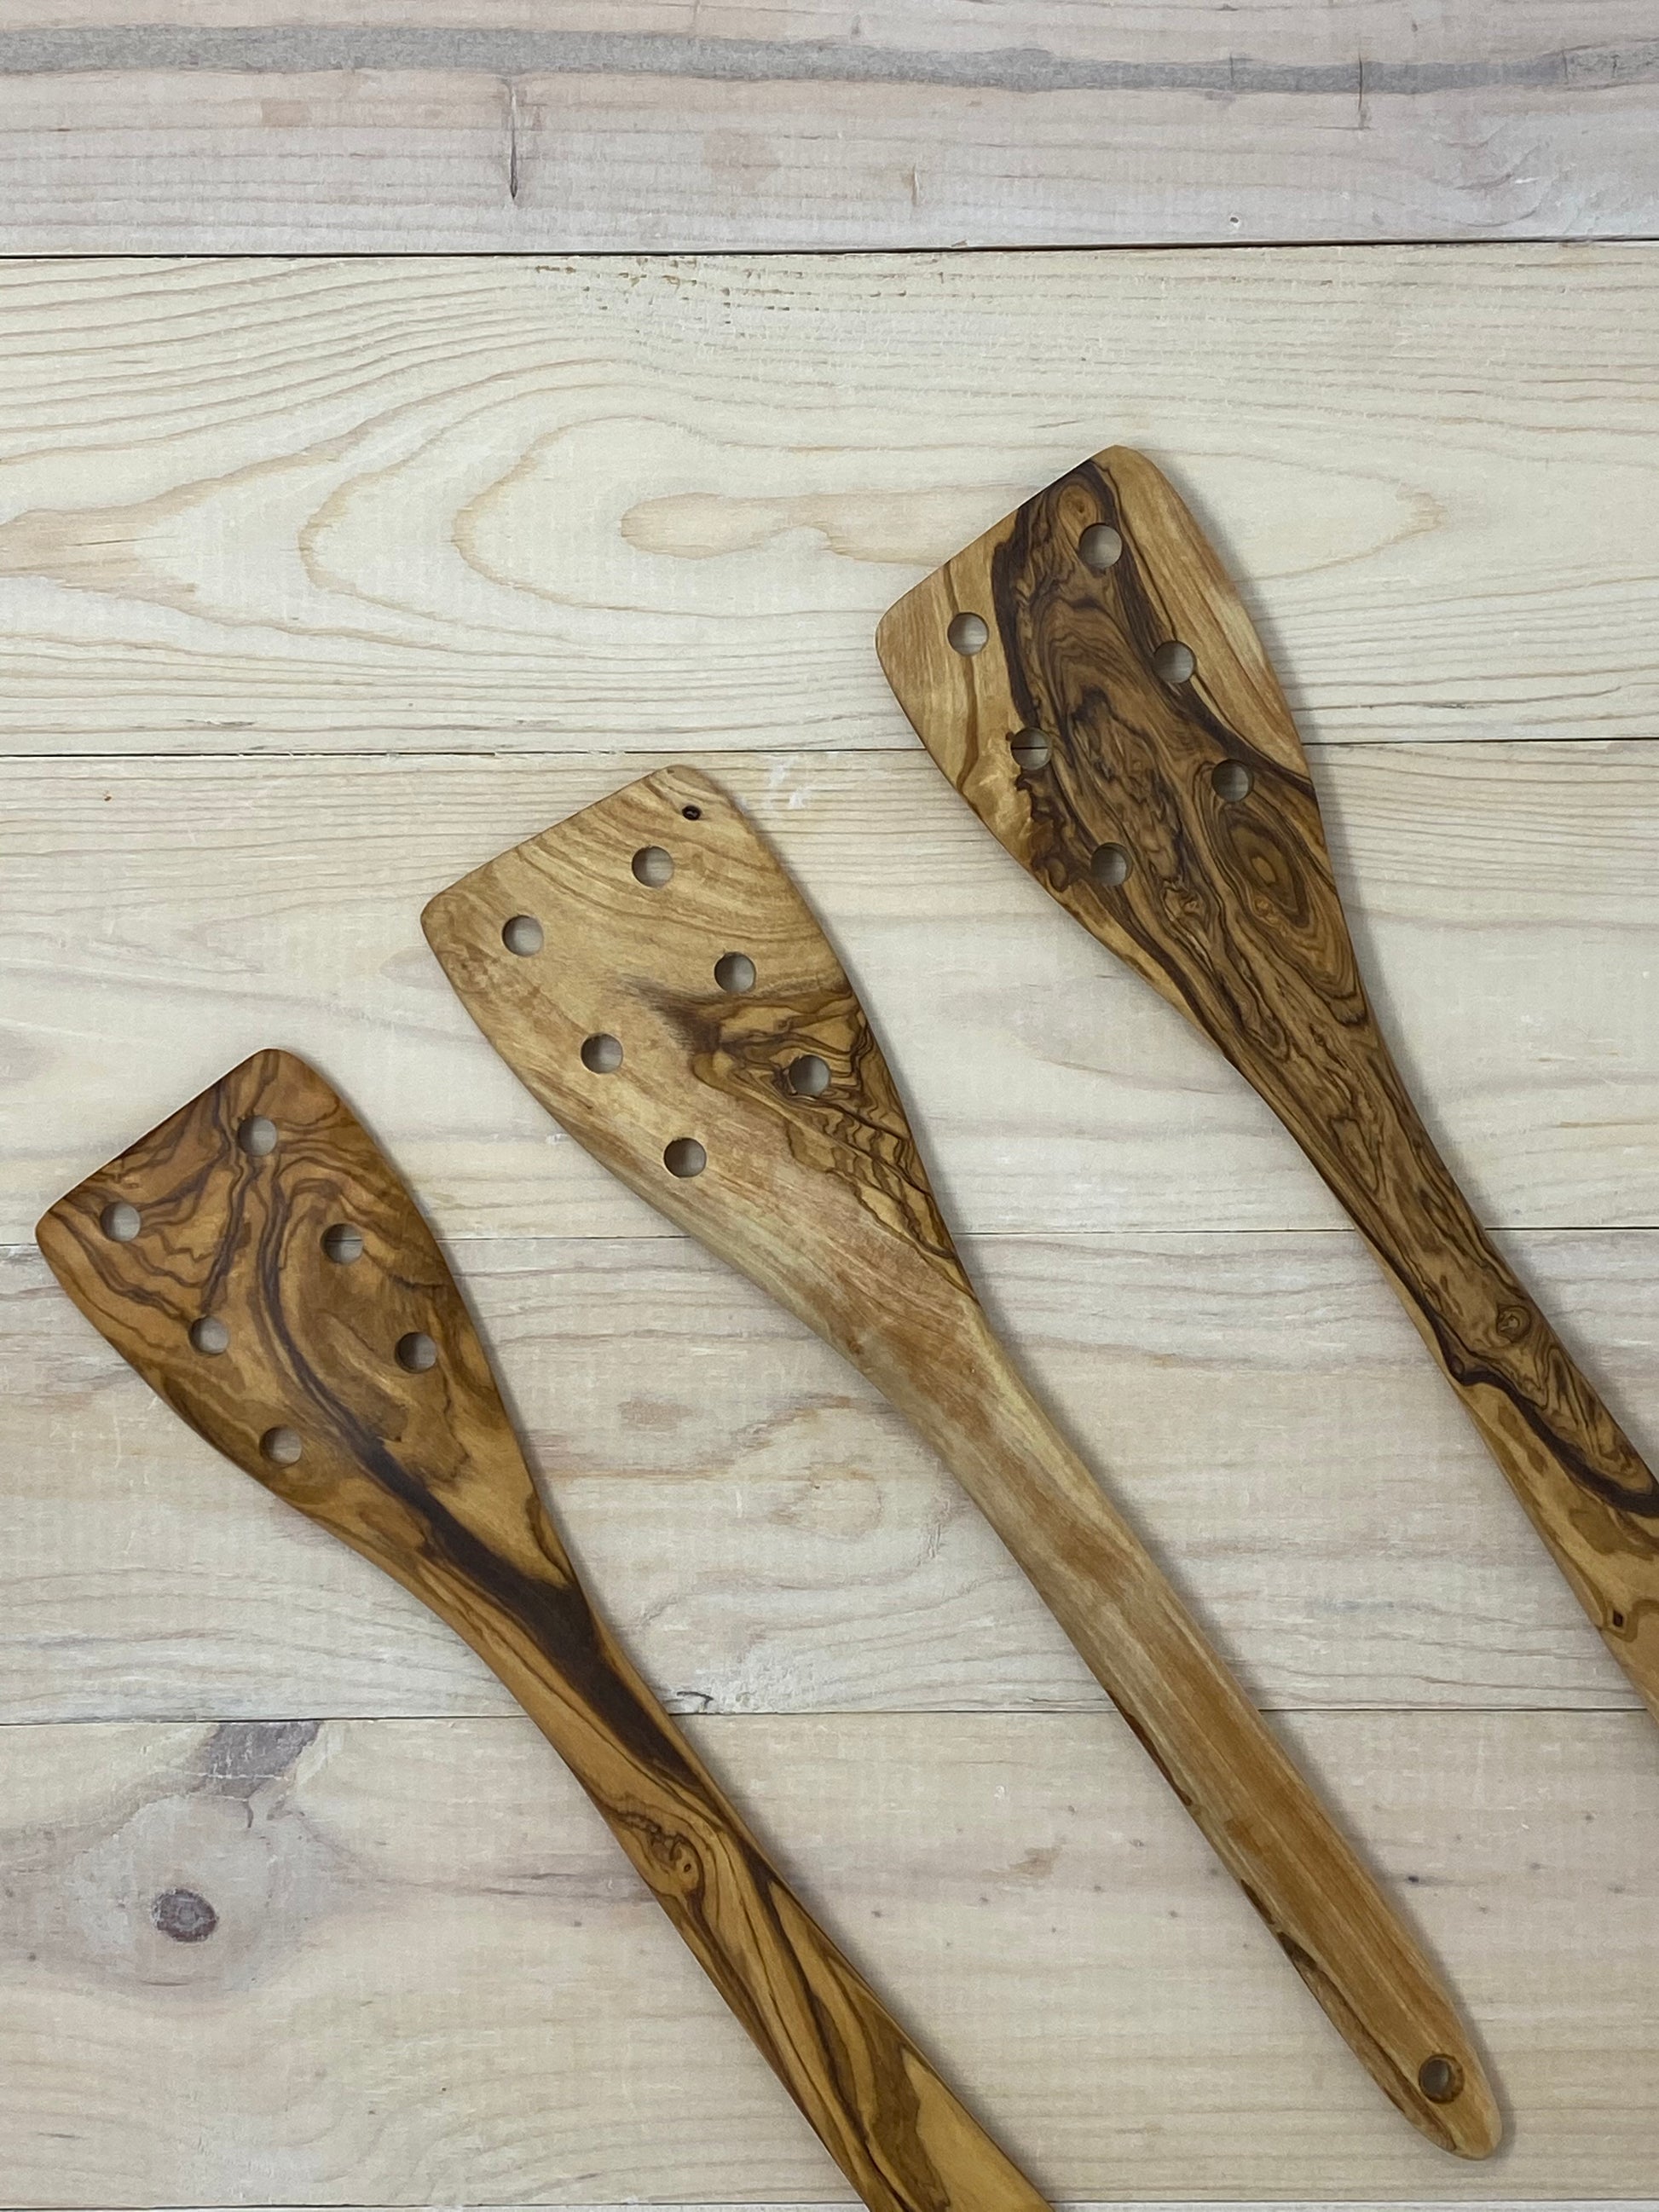 Slotted Spoon: Olive Wood Kitchen Utensil